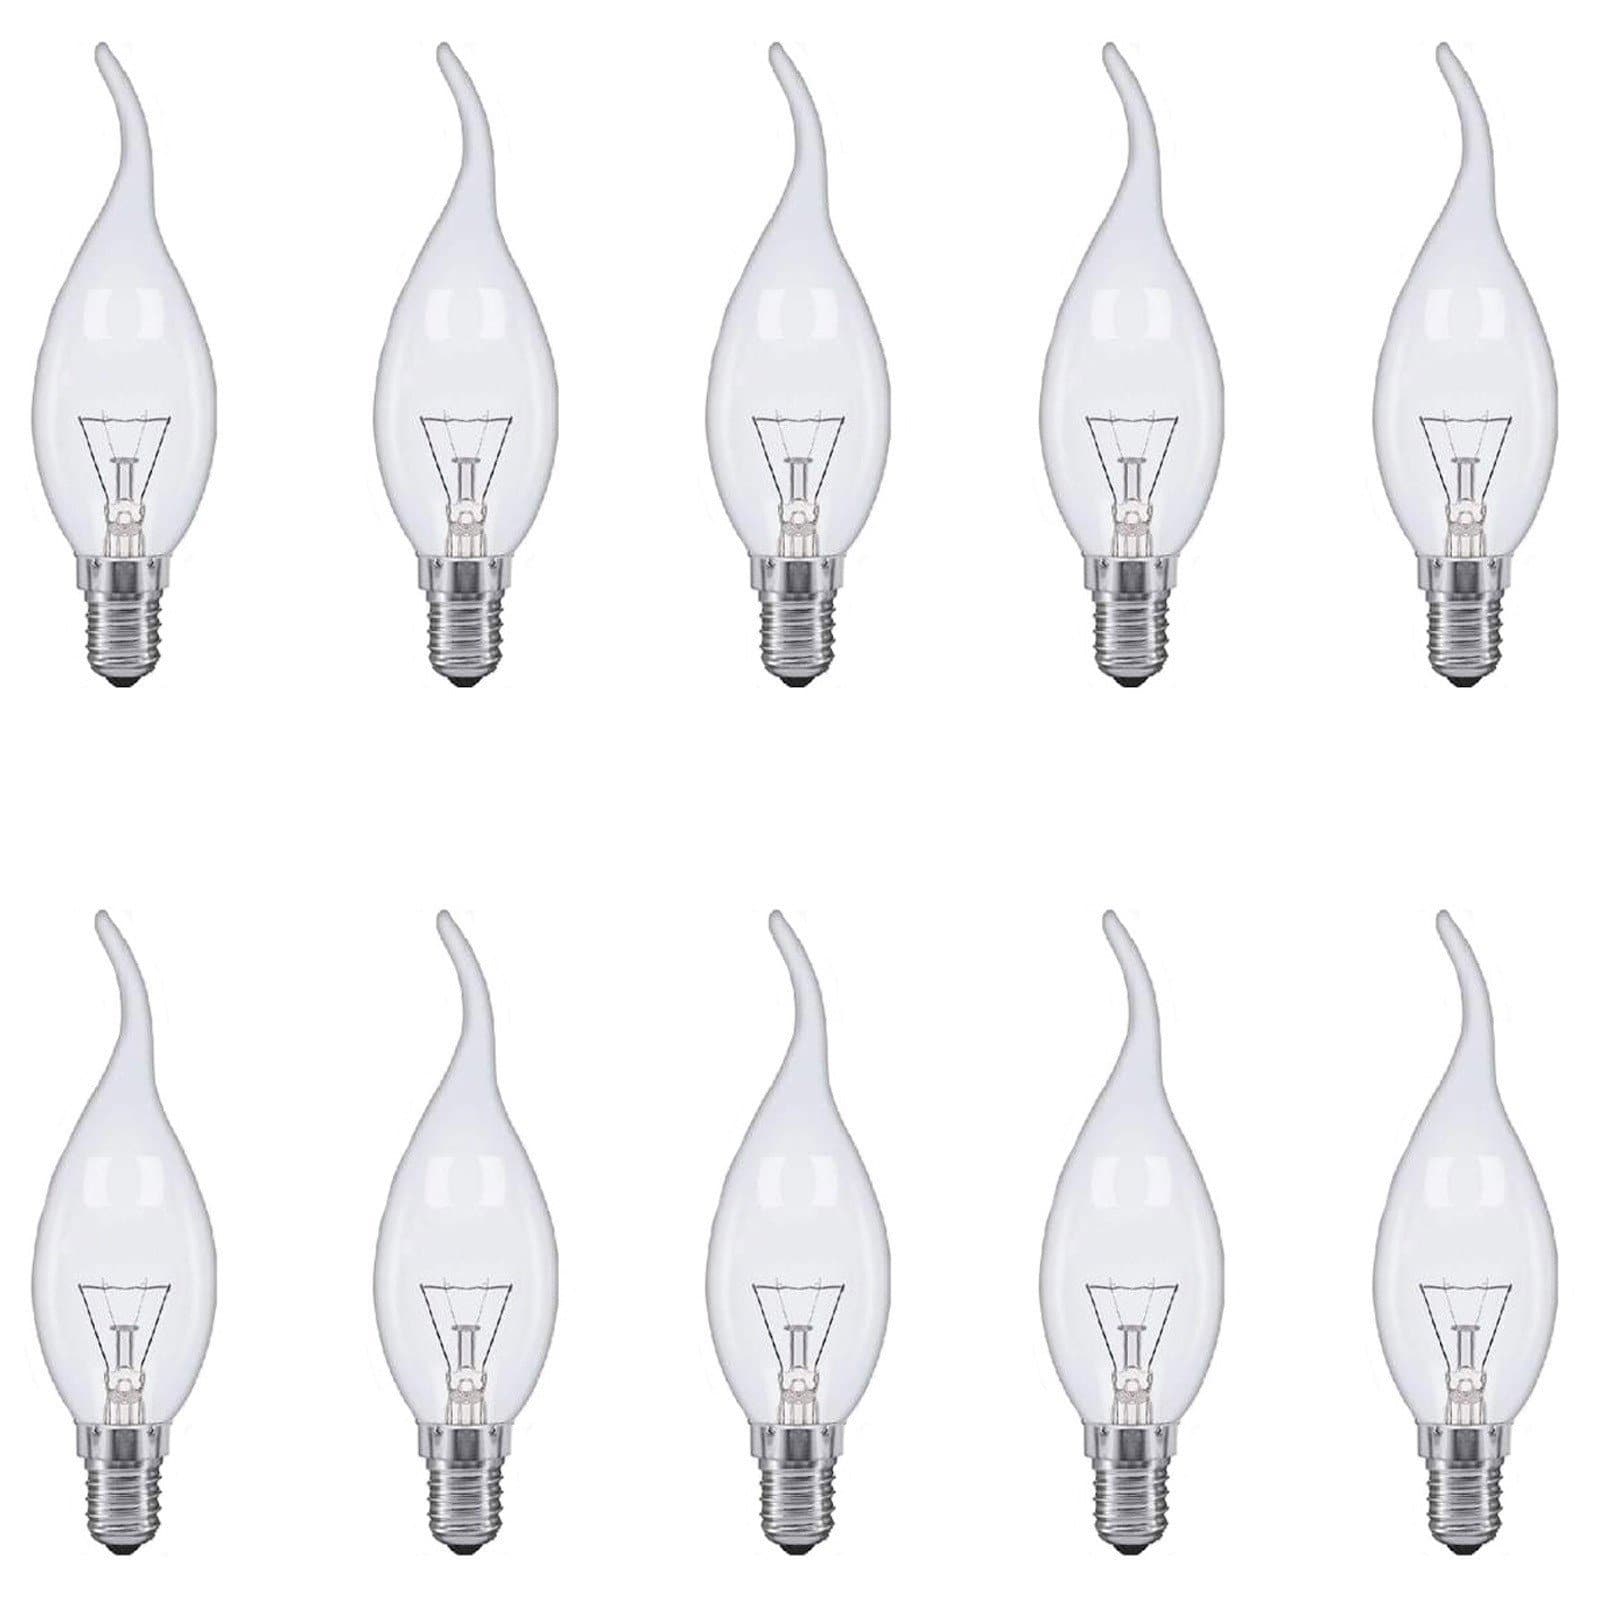 E14 Flame Tip Fancy Chandelier Candle Globes - Pack of 10 Clear